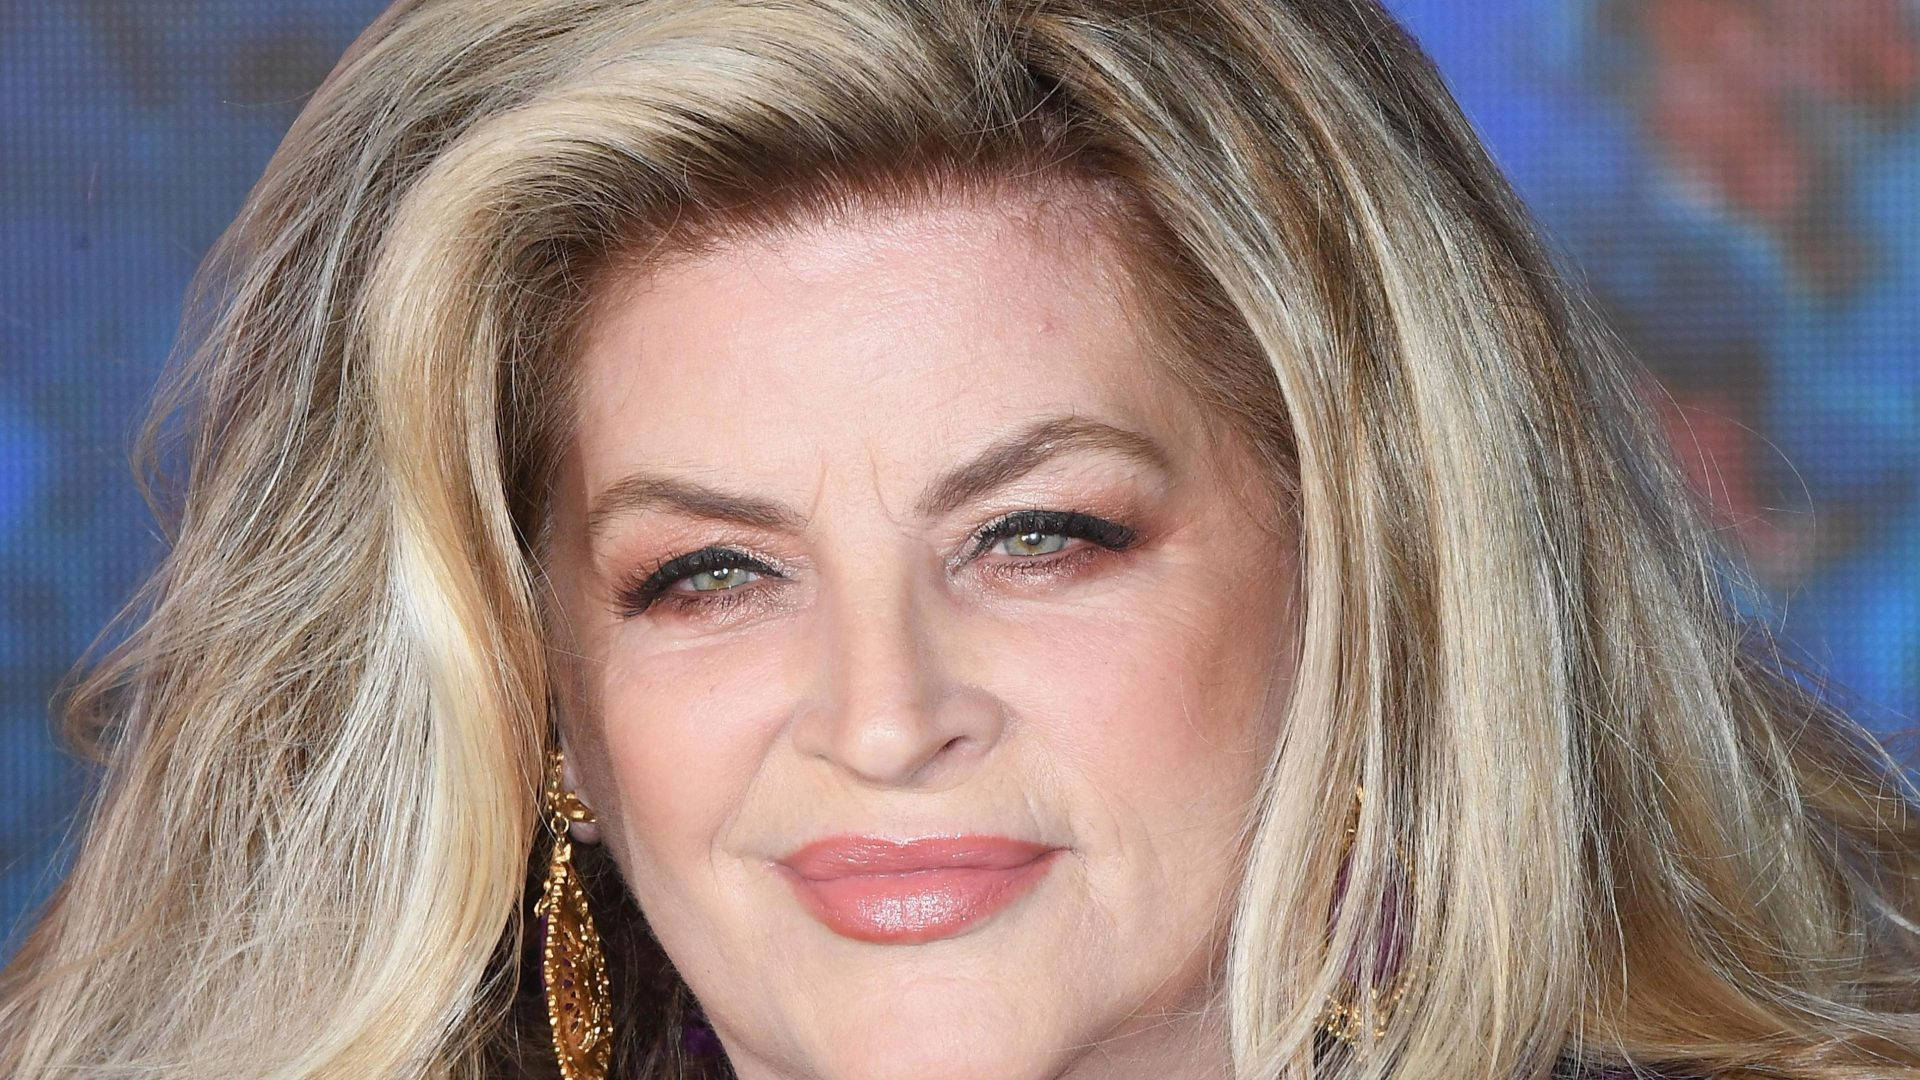 Kirstie Alley In Celebrity Big Brother 2018 Launch Background